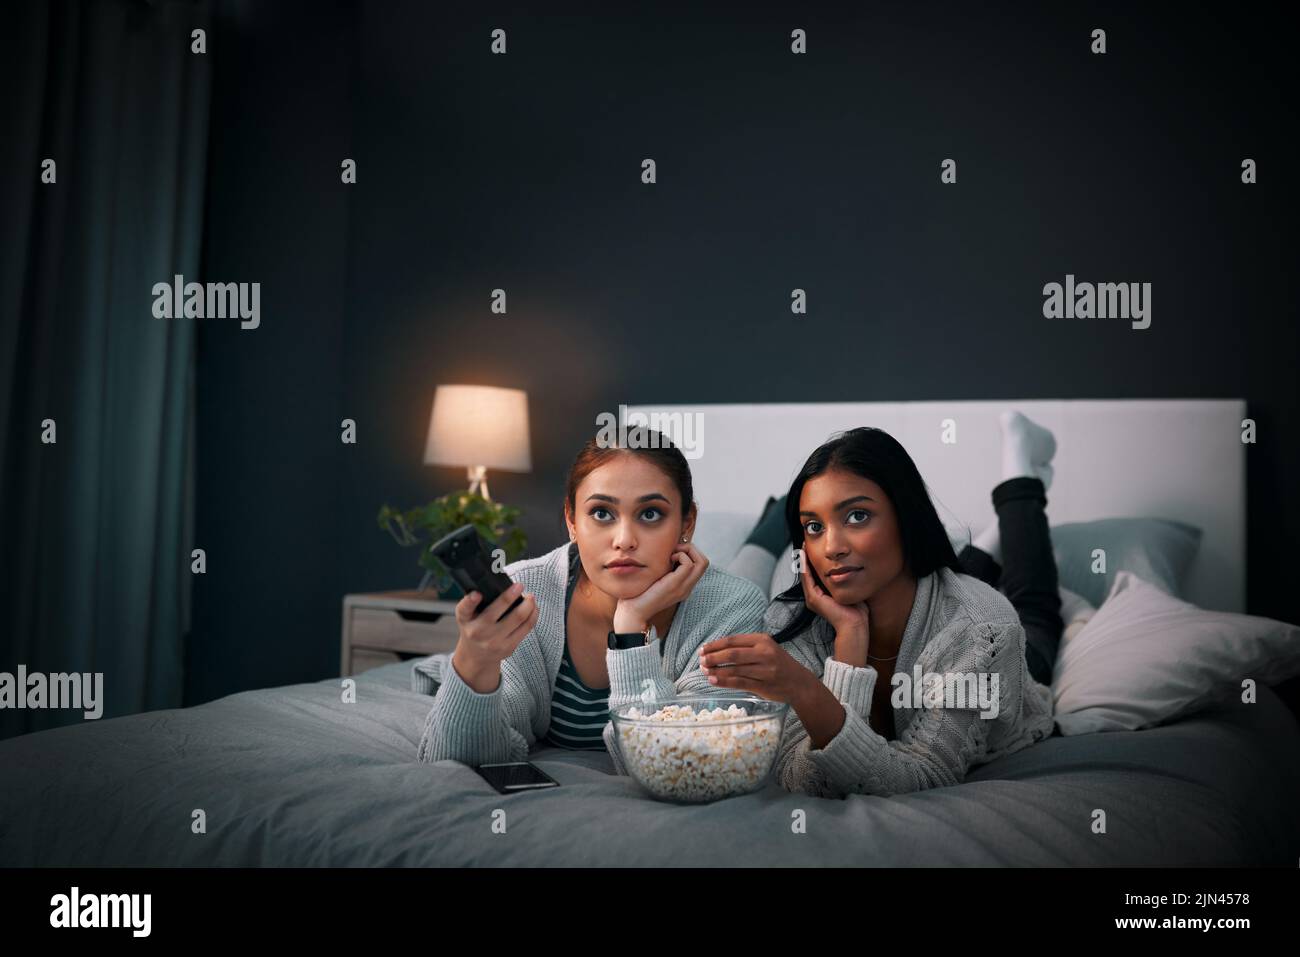 Lets see what we can watch. two young women eating popcorn while watching a movie at home. Stock Photo